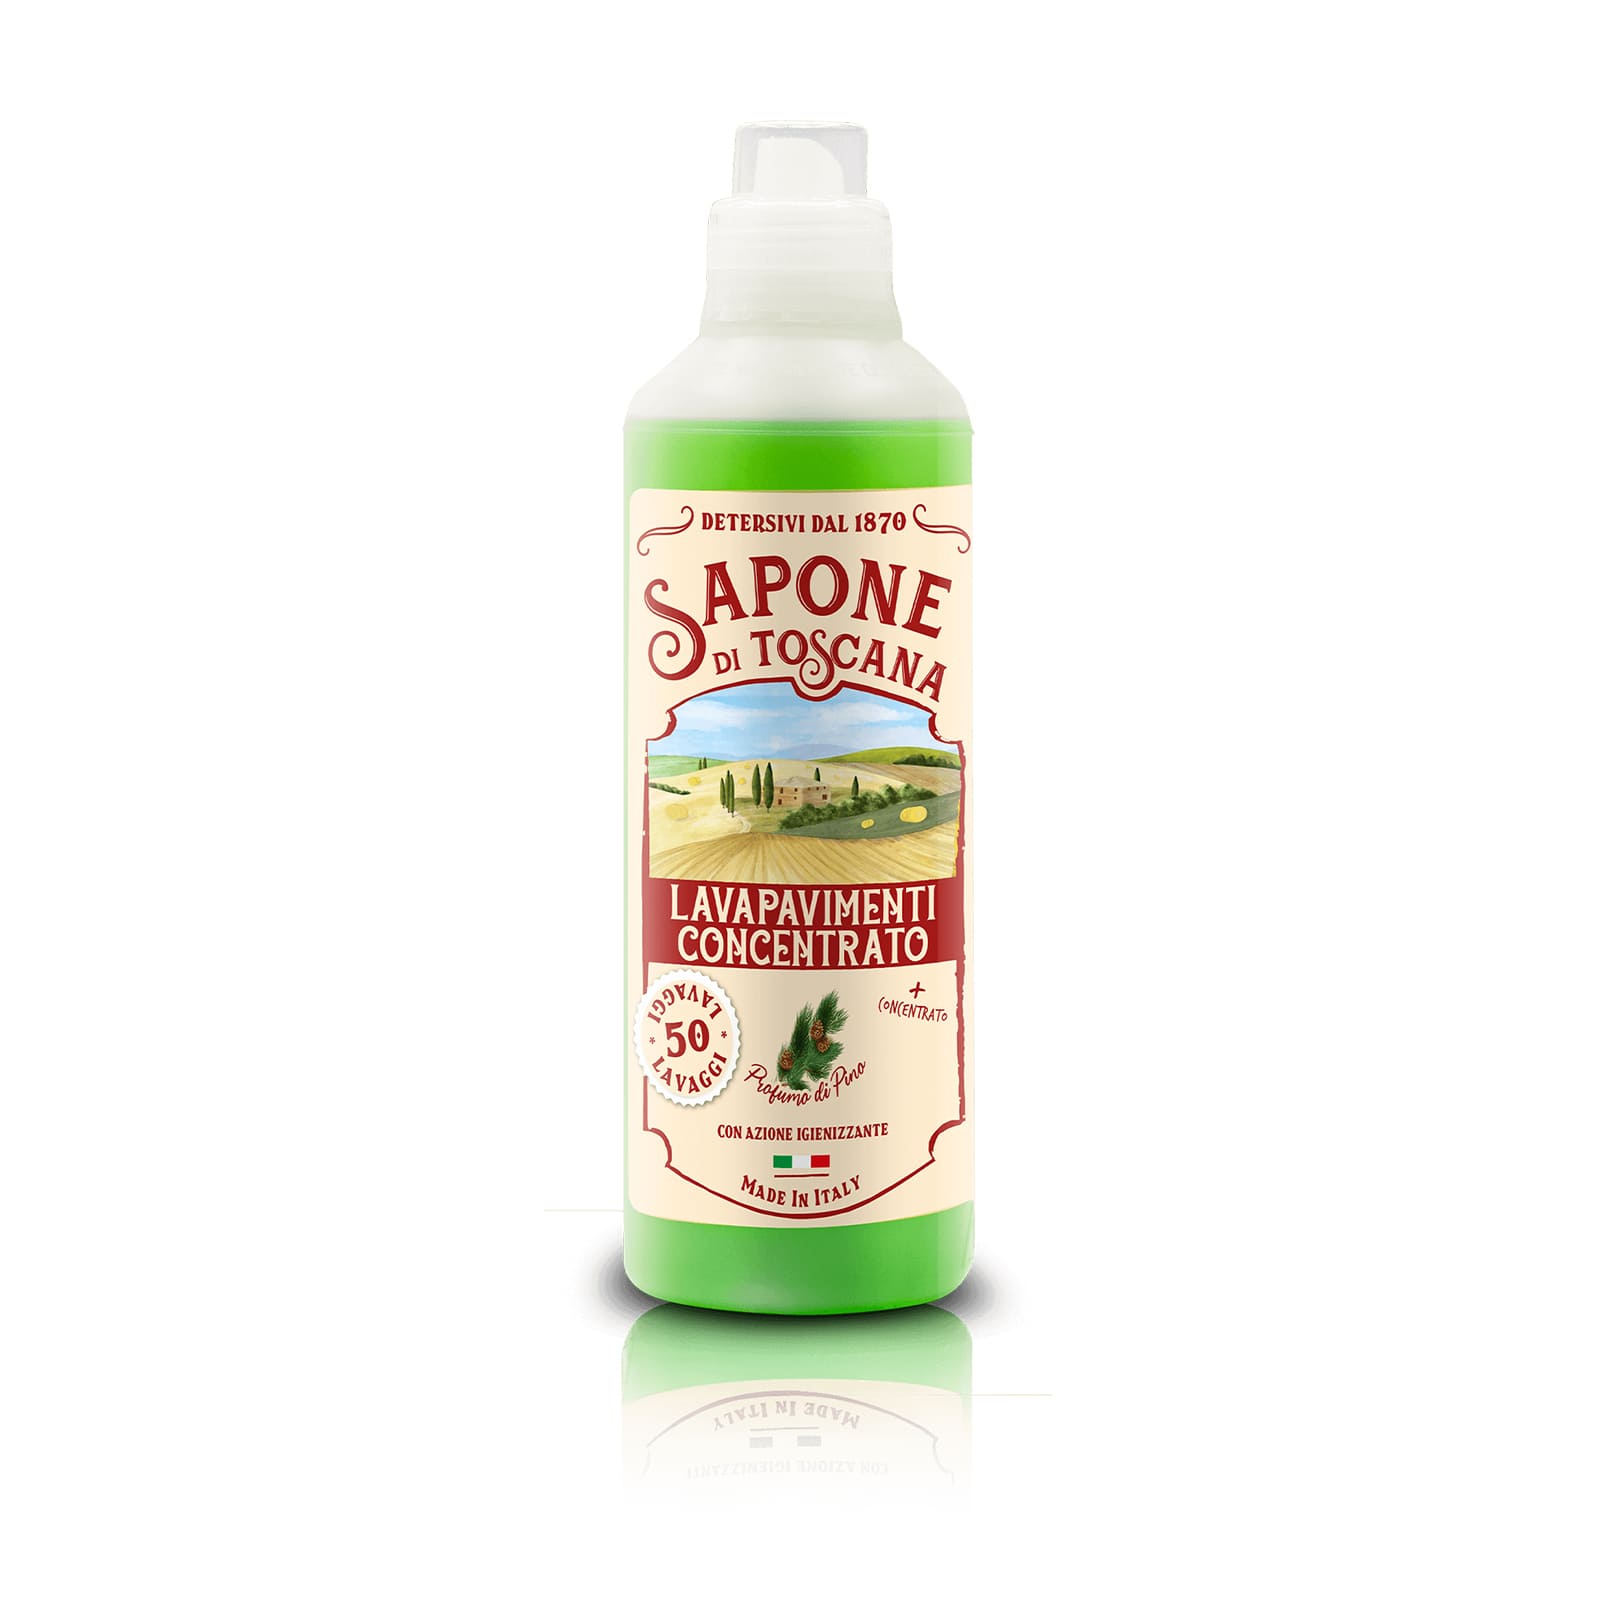 Concentrated floor cleaner - Scots pine